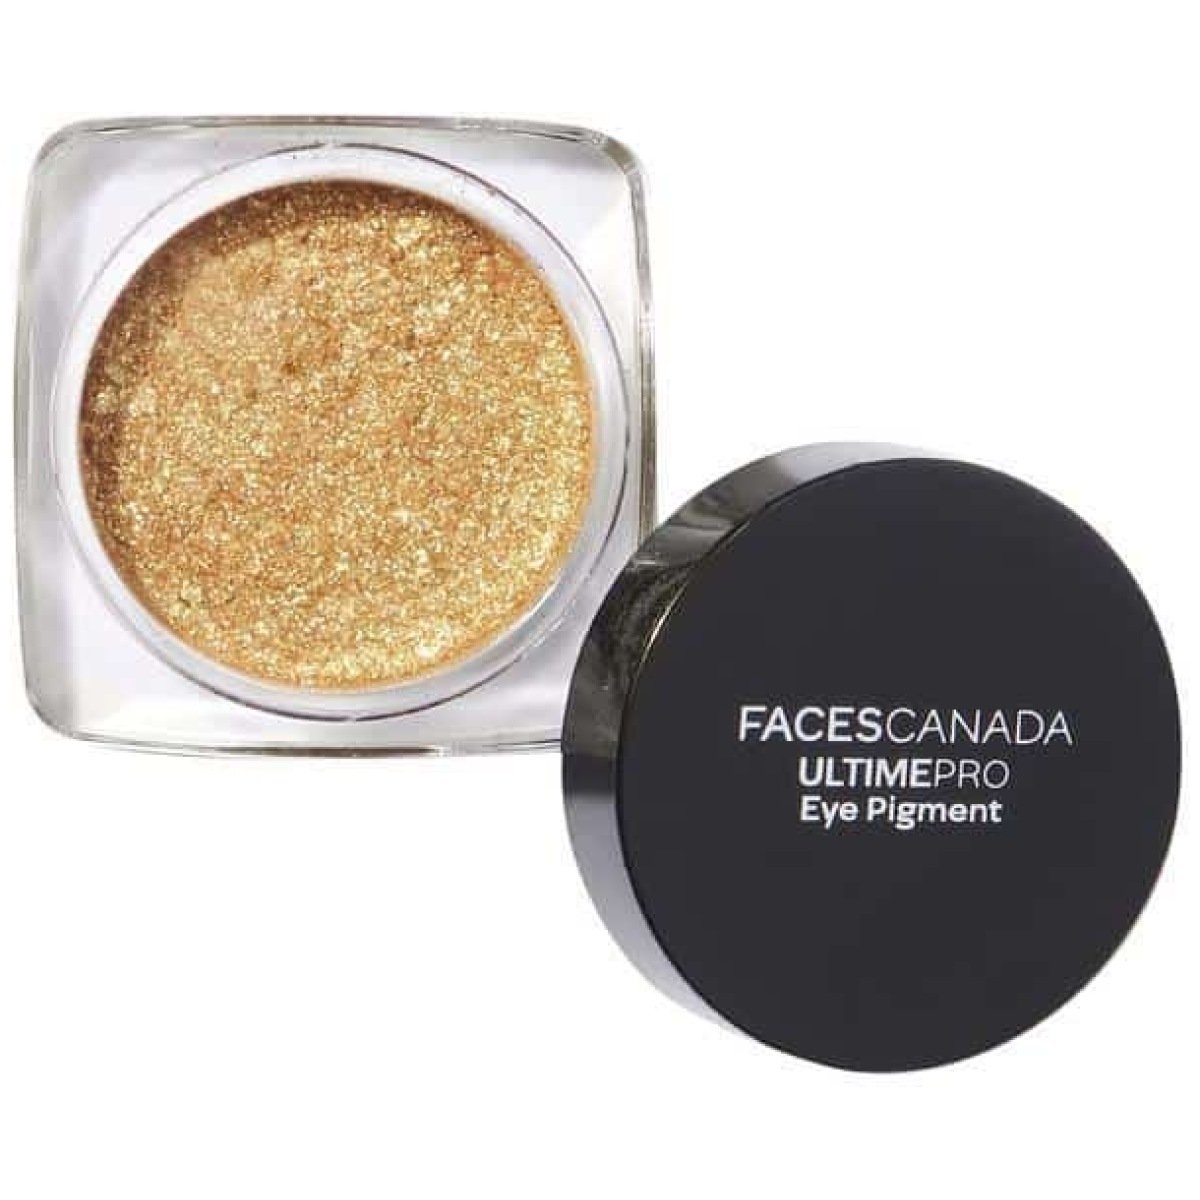 Faces Canada Ultime Pro Eye Pigment Gold 02 1.8G